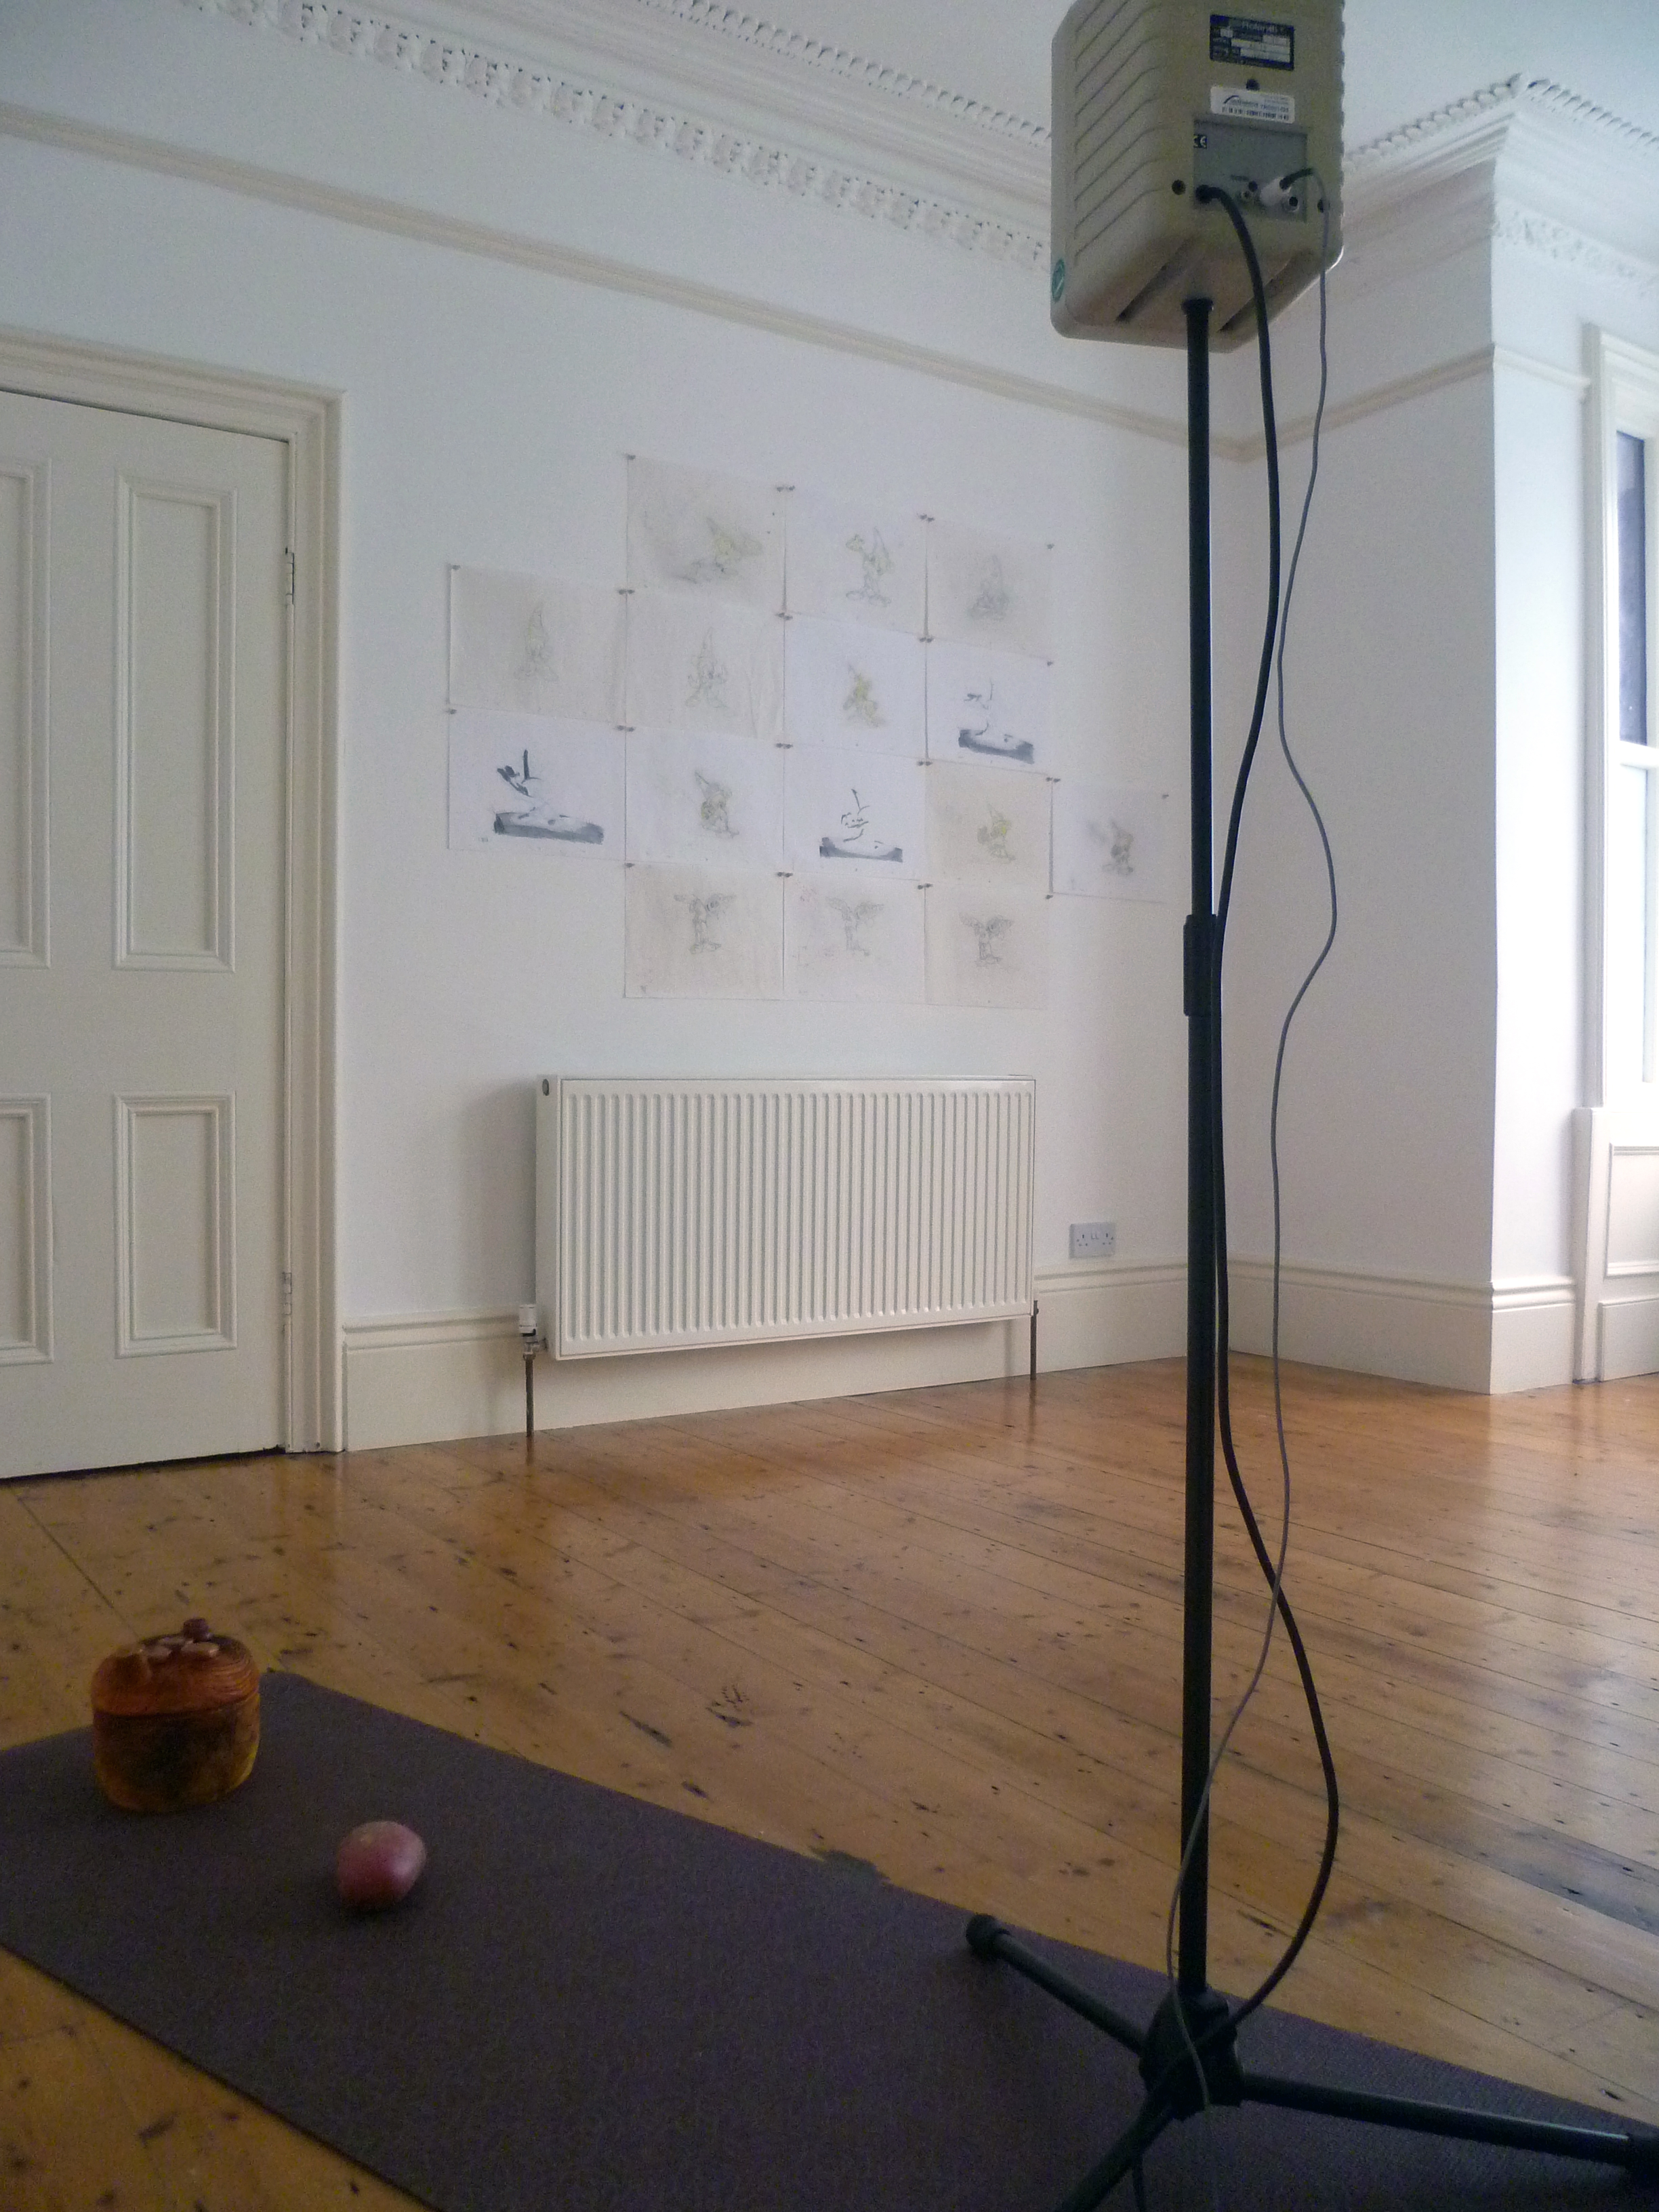 The front room of a terraced house, it has white walls and a polished wood floor. In the floreground, a yoga mat with a small ceramic head and a potato on it, a tall stand with a speaker just to the side. Behind, on the wall, above a white radiator a set of 15 a4 sized pencil drawings.